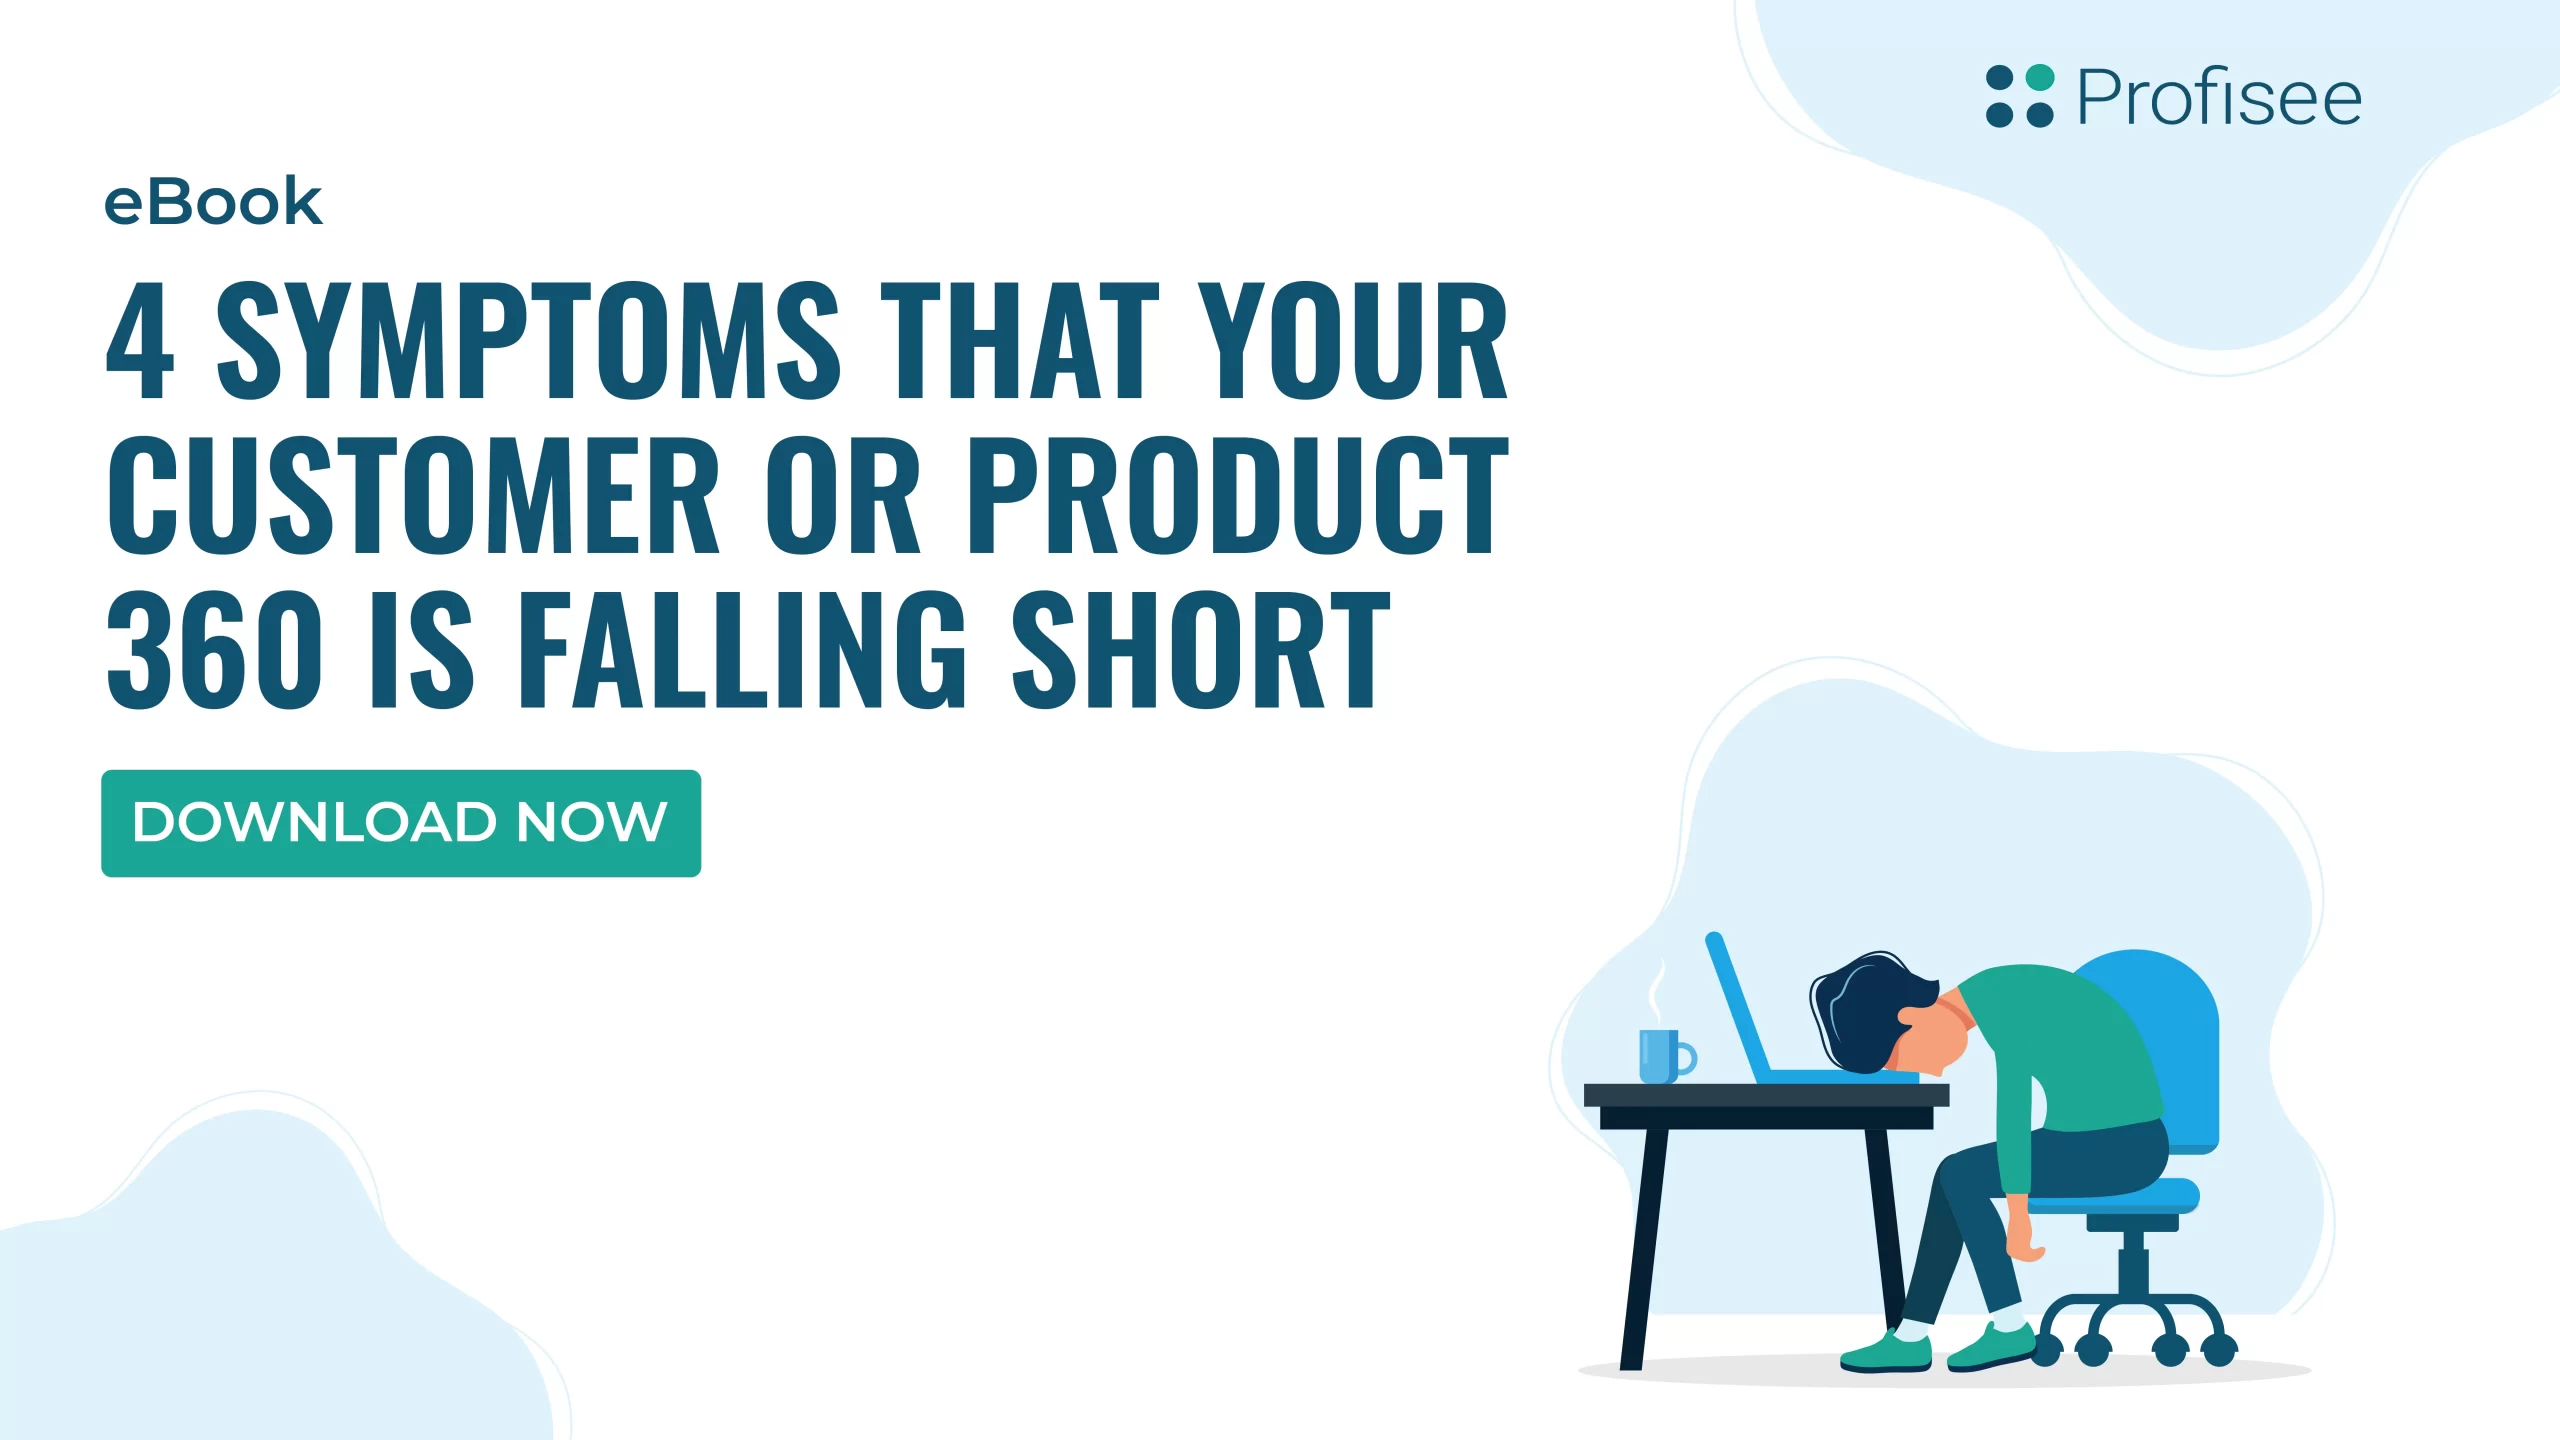 Header graphic with the text “4 Symptoms That Your Customer or Product 360 is Falling Short.”